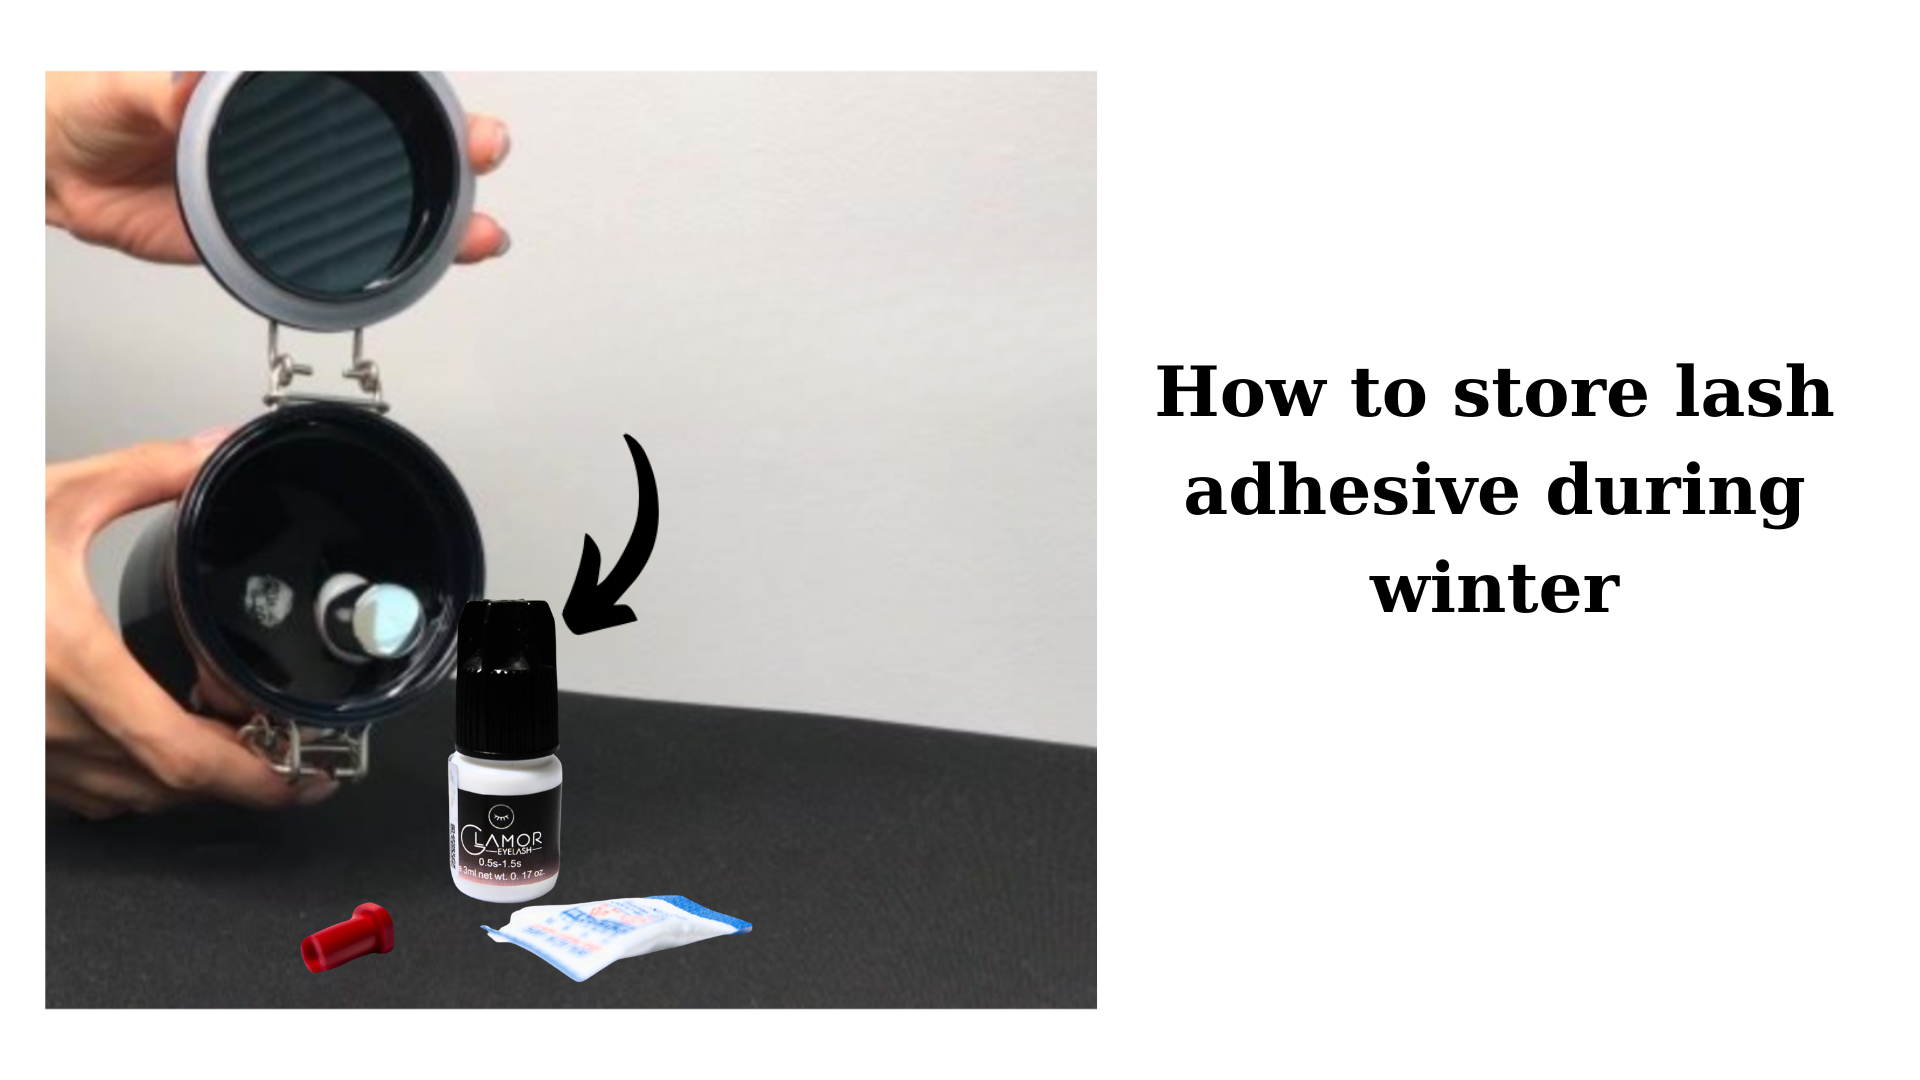 How to store lash adhesive during winter